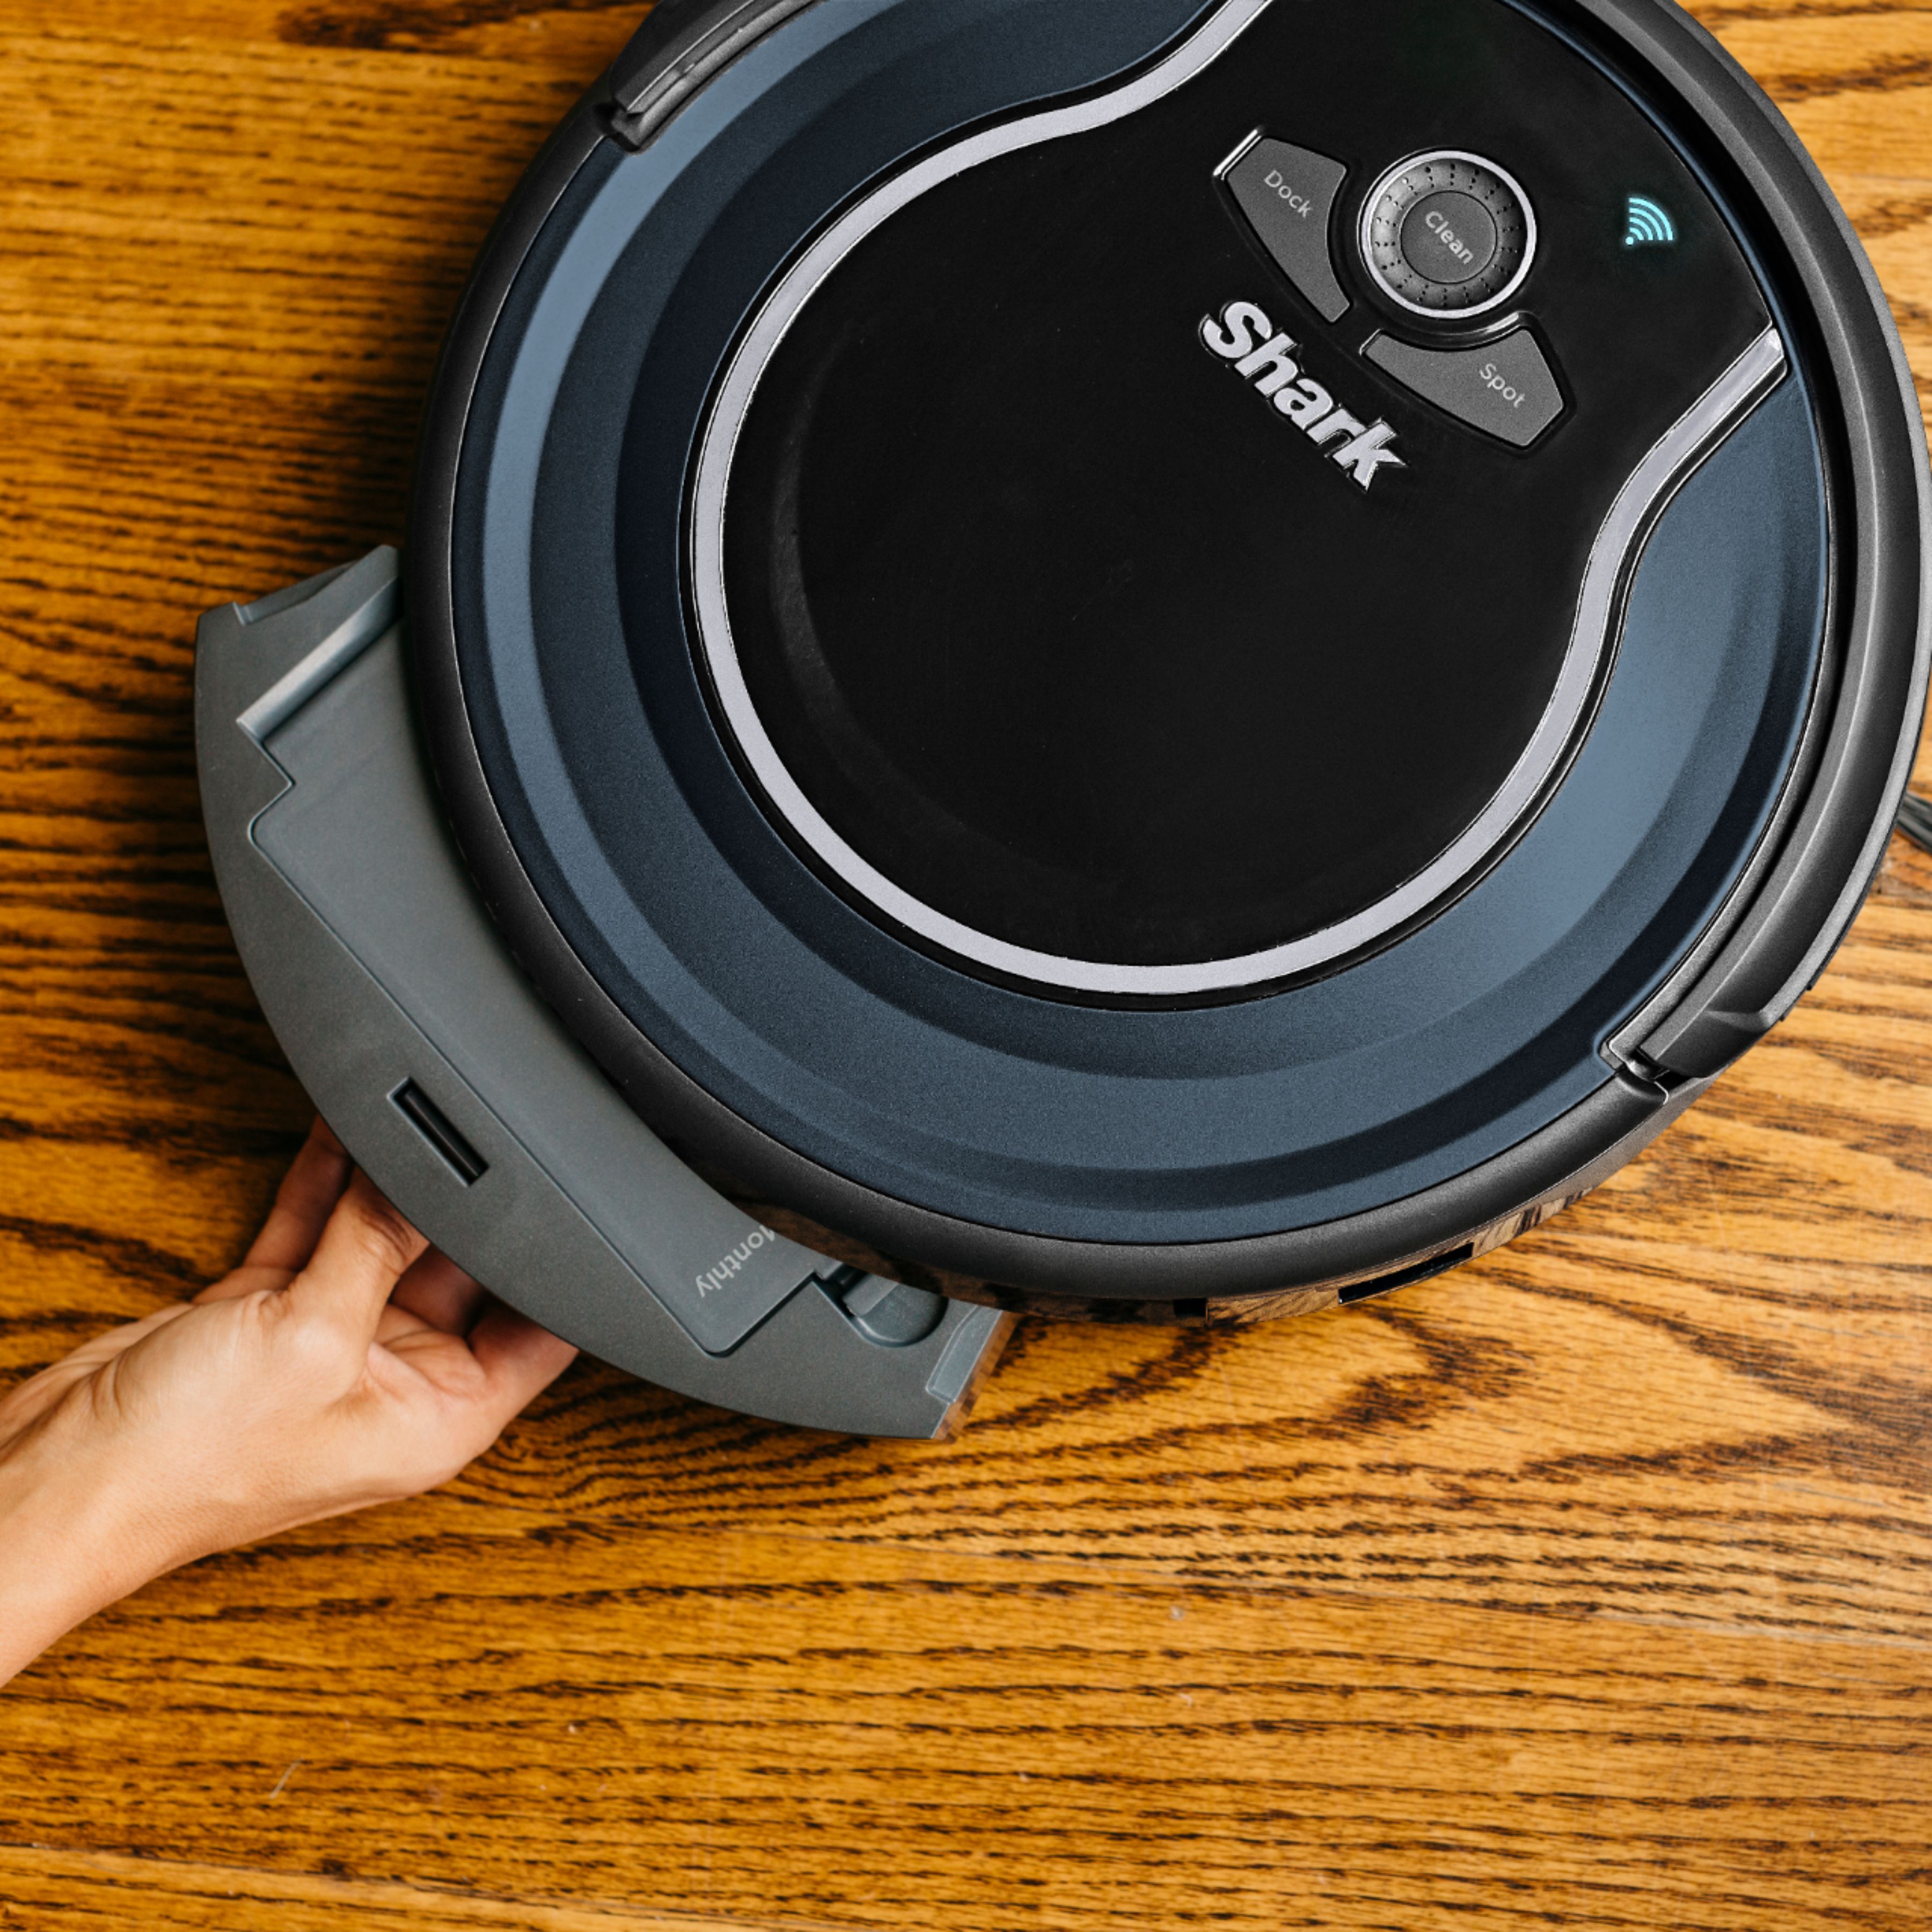 NEW Shark ION Robotic Vacuum Wi-Fi Connected Multi-Surface Cleaning BLUE R76